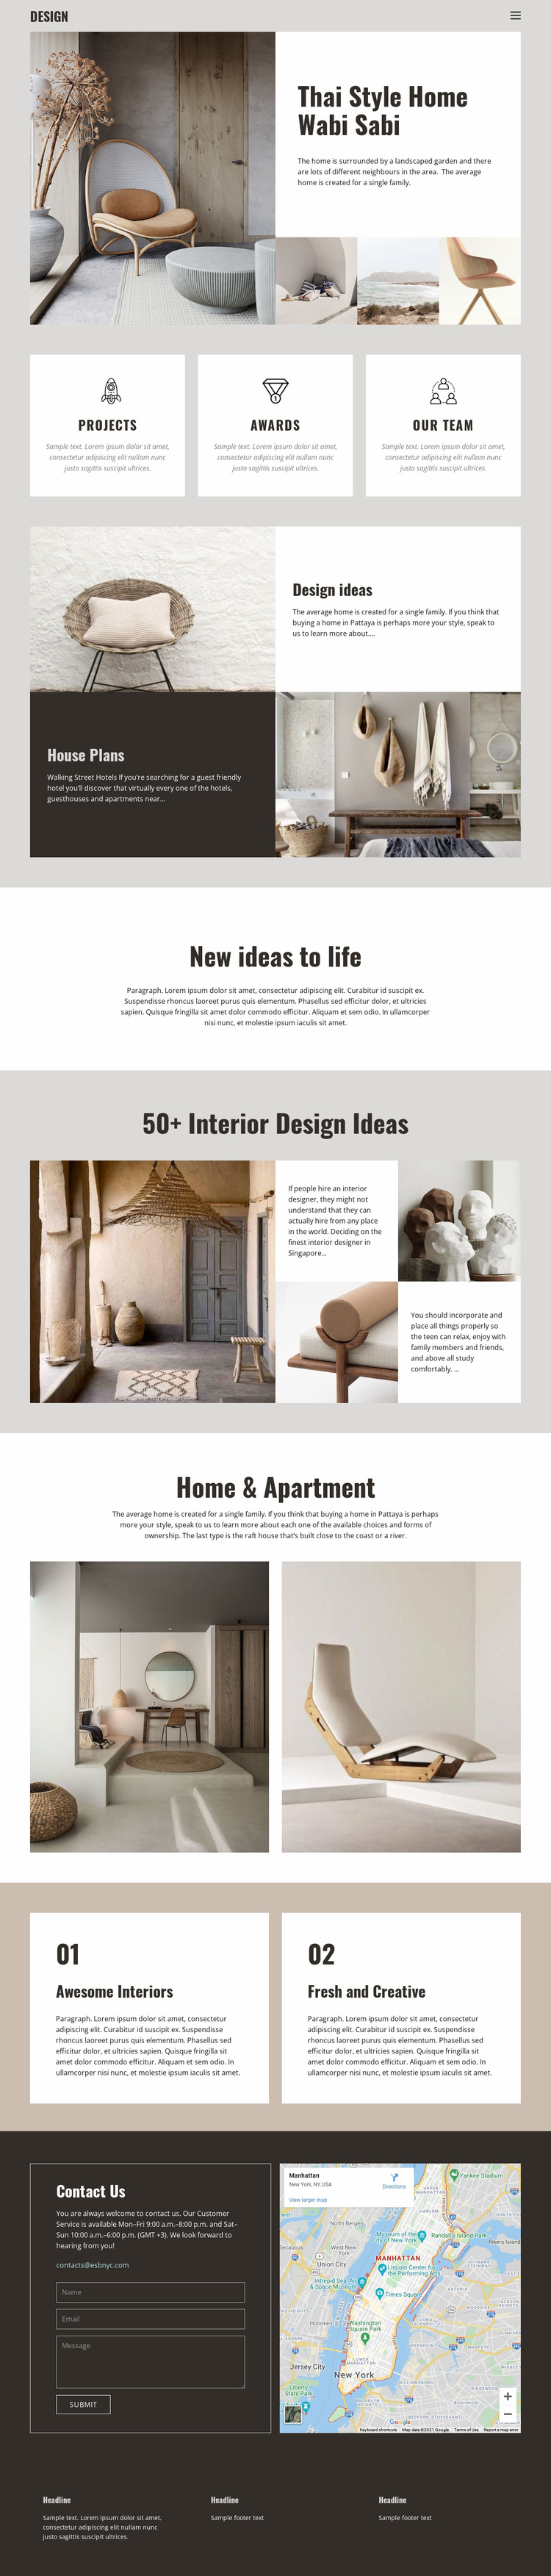 Thai style for home design Website Template